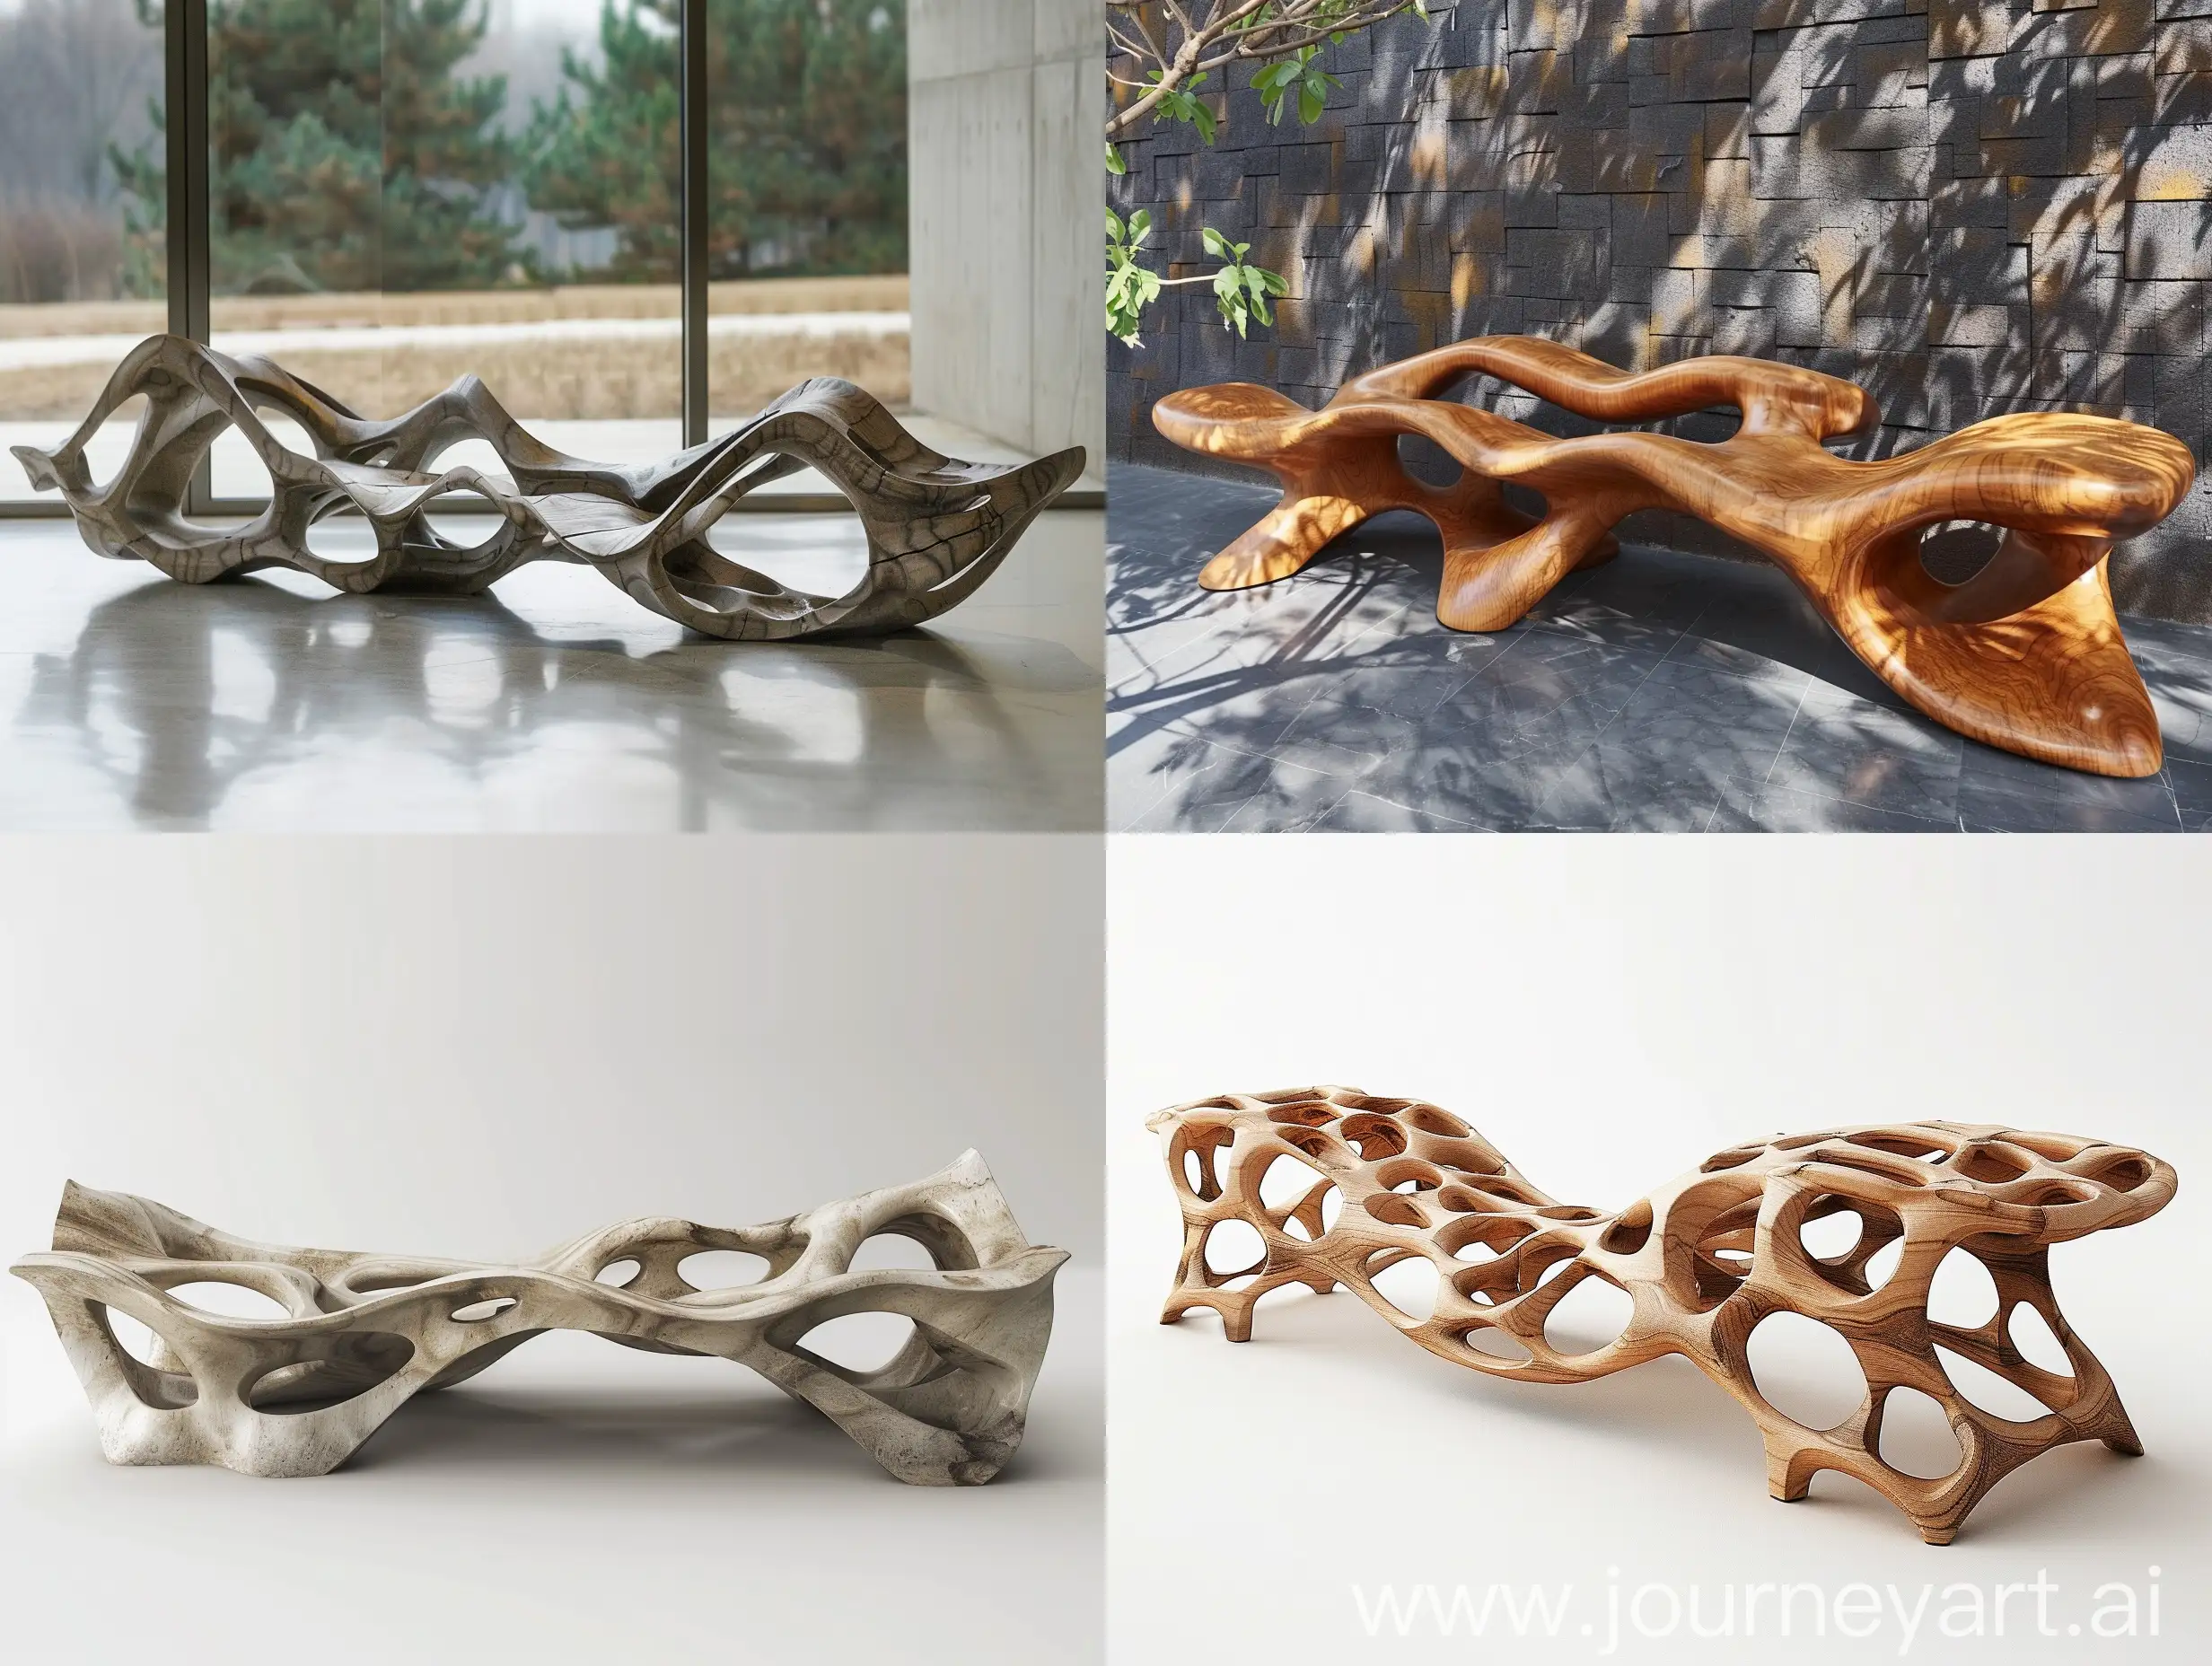 EcoSustainable-Bench-with-Organic-Tree-Root-Design